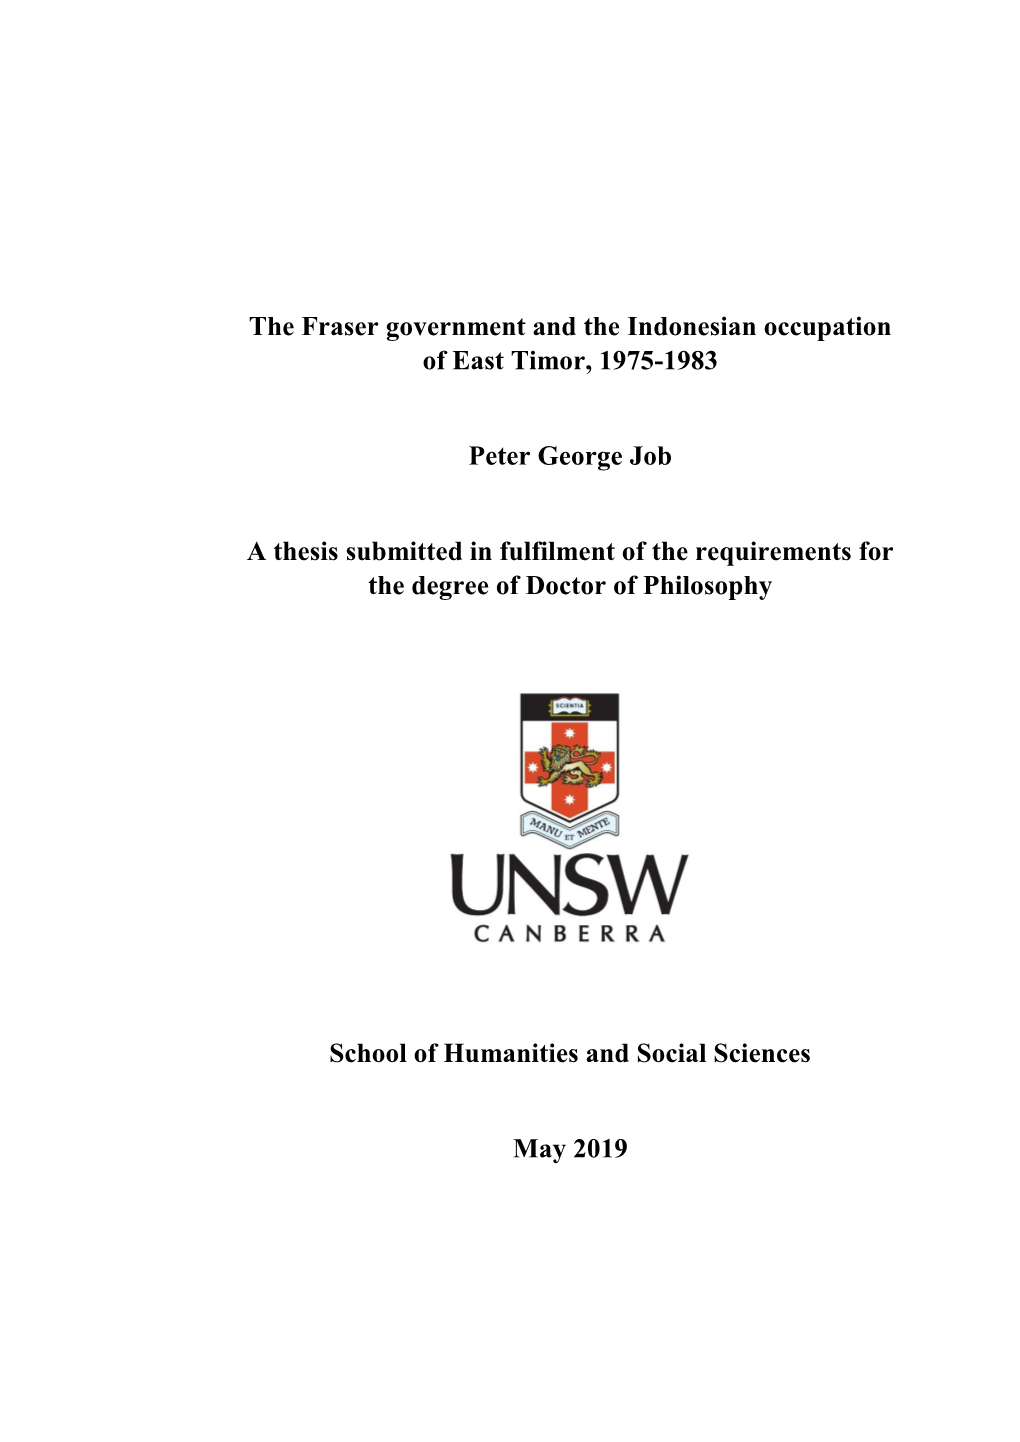 The Fraser Government and the Indonesian Occupation of East Timor, 1975-1983